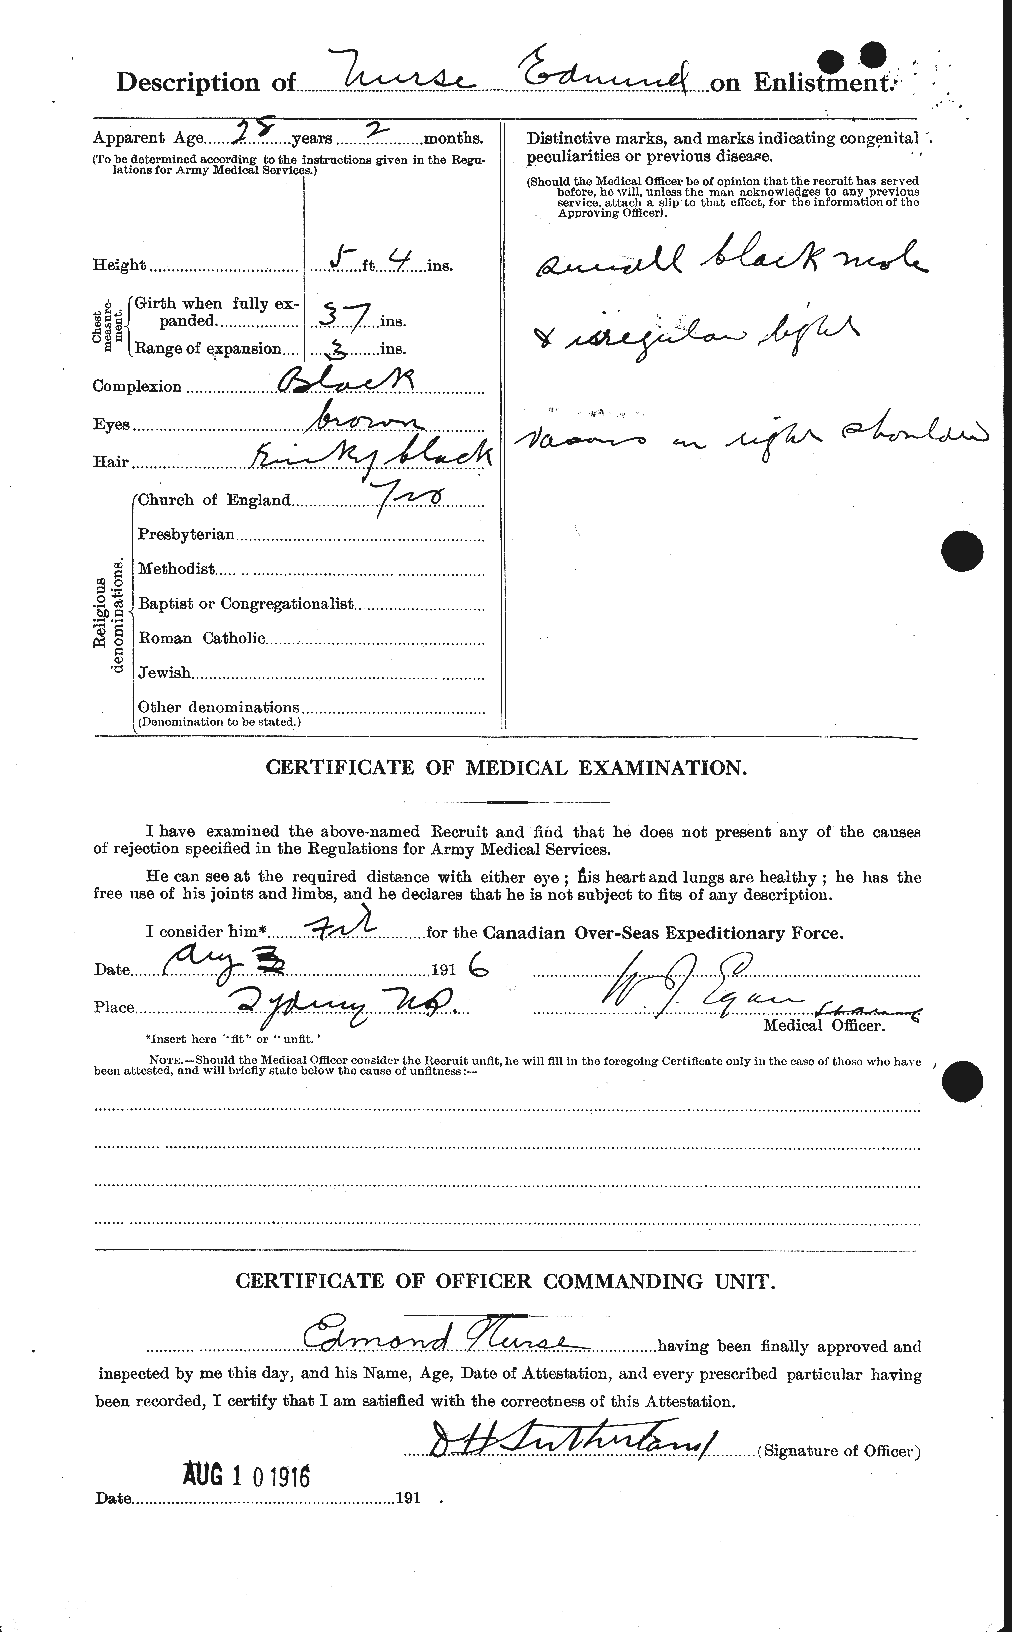 Personnel Records of the First World War - CEF 553362b